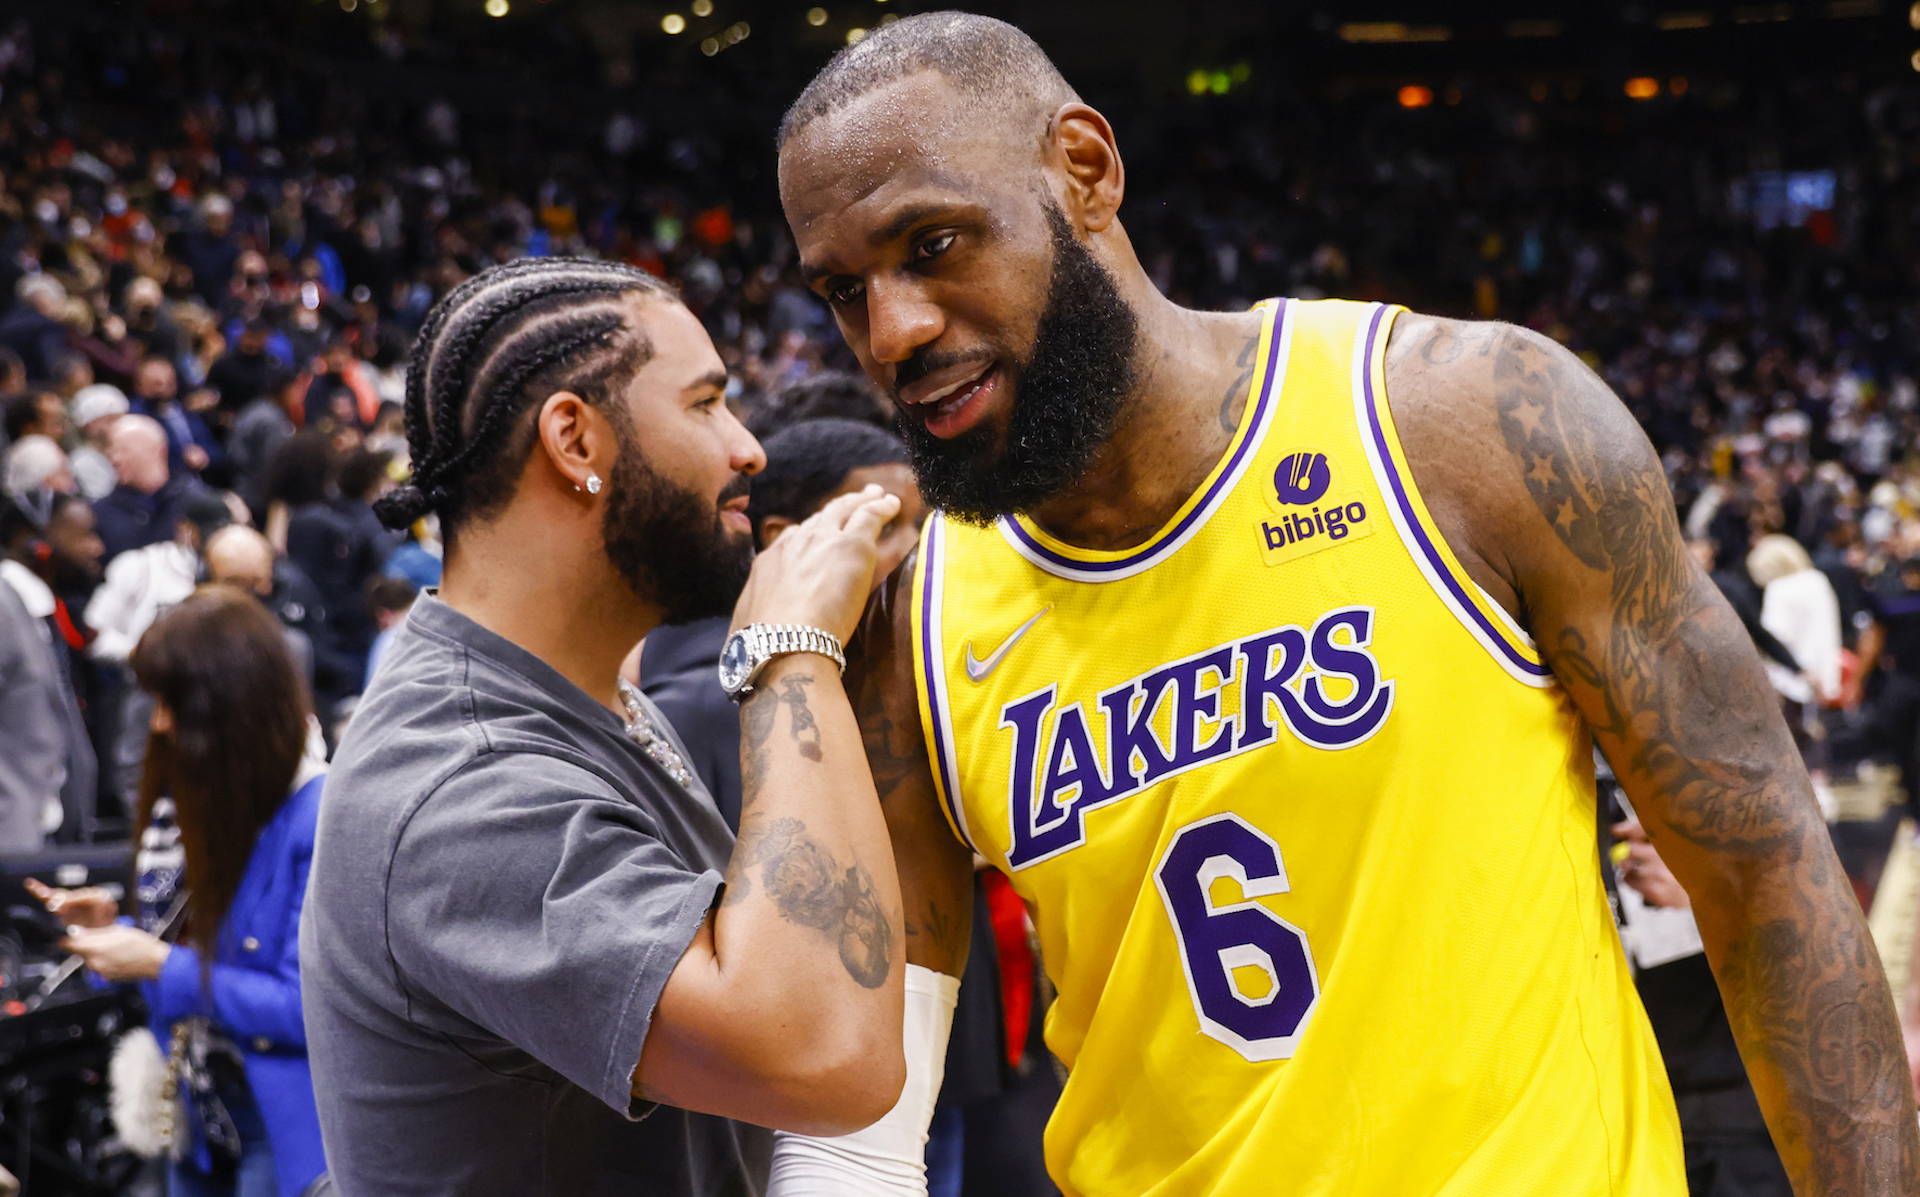 LeBron Shouts Out 'Nephew' Adonis Imitating Him After Drake Shares Video of Son Shooting Hoops in Lakers Jersey